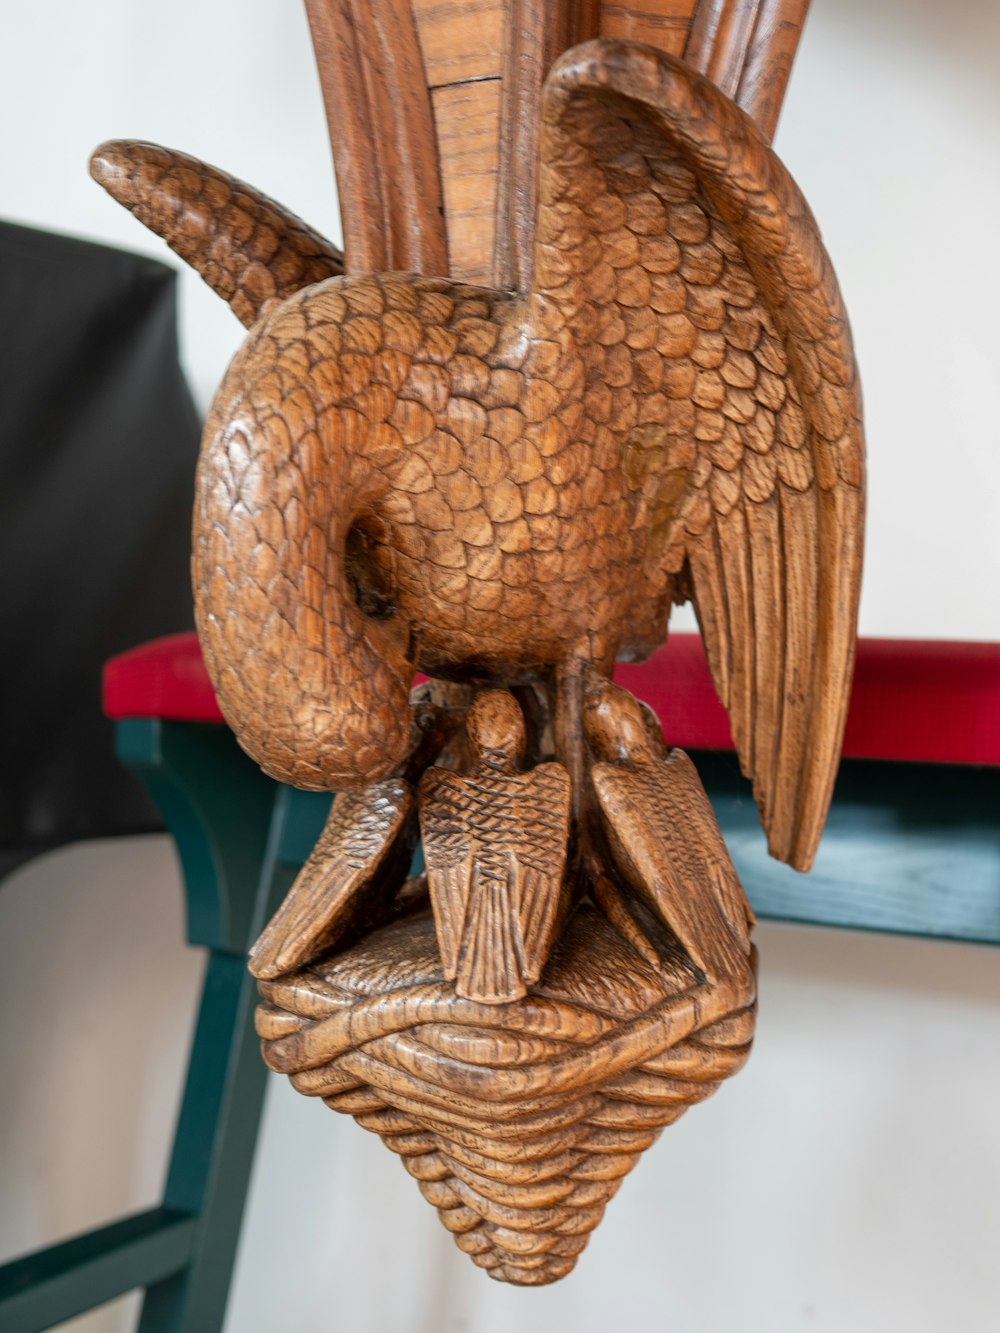 a wooden sculpture of an eagle on a chair